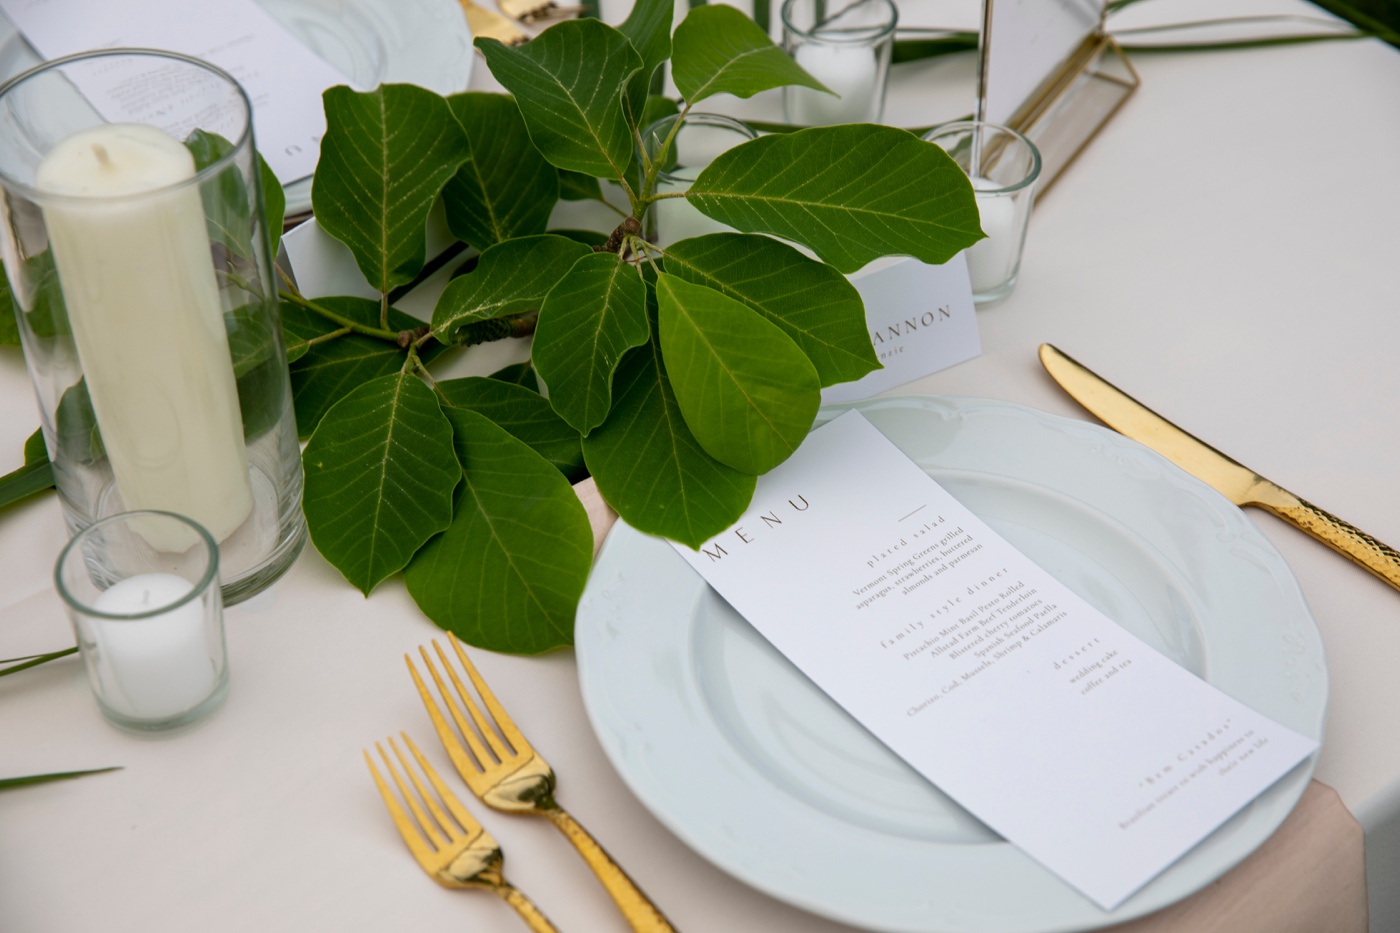 White table linens, blush napkins, and greenery for a backyard wedding reception